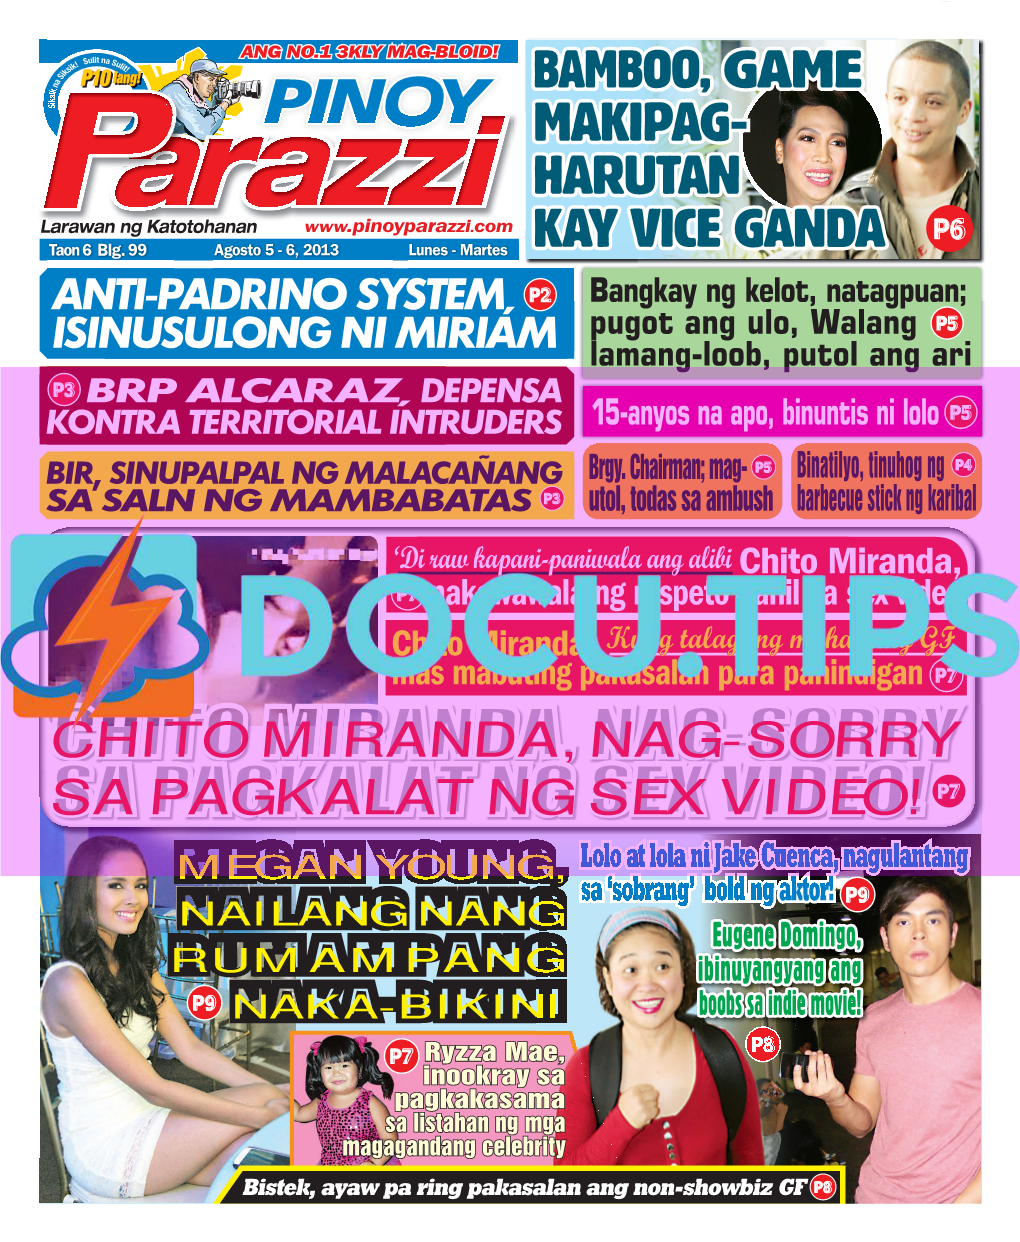 Pinoy Parazzi Vol 6 Issue 99 August 5